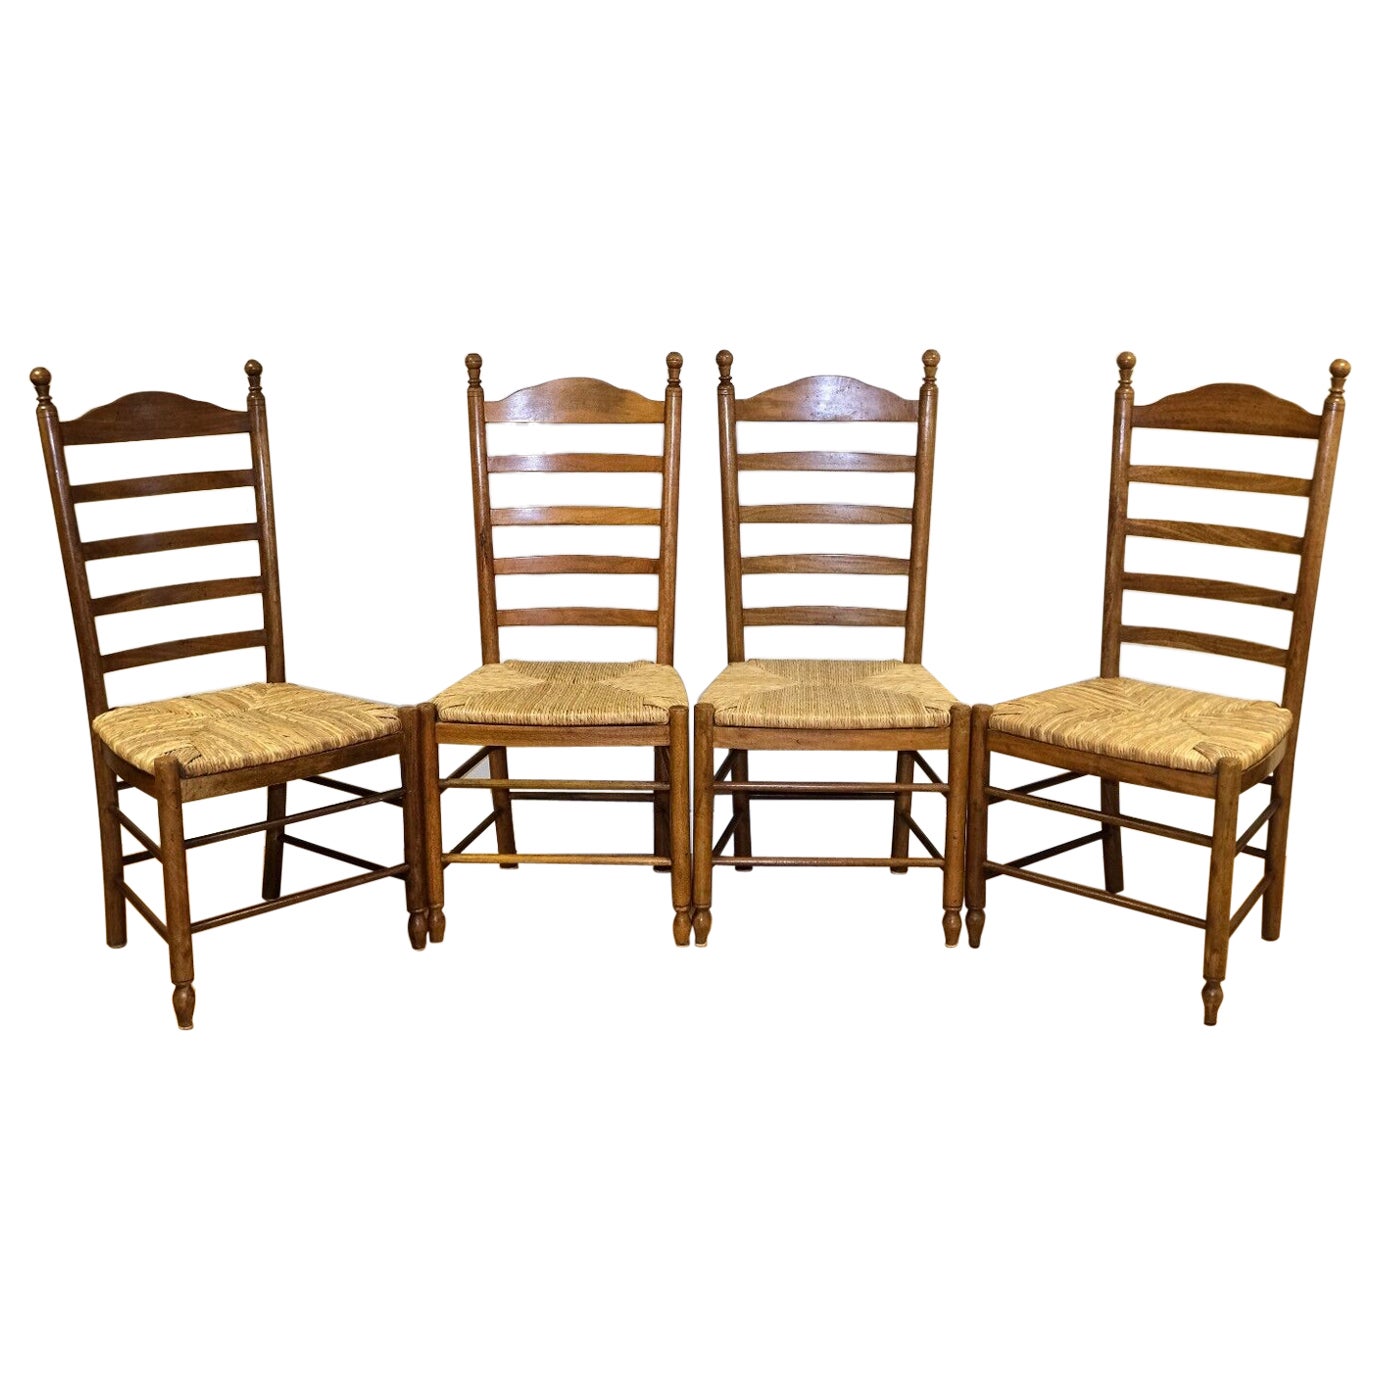 LOVELY SET OF 4 OAK FARMHOUSE RUSH SEAT LADDER BACK DiNING CHAIRS